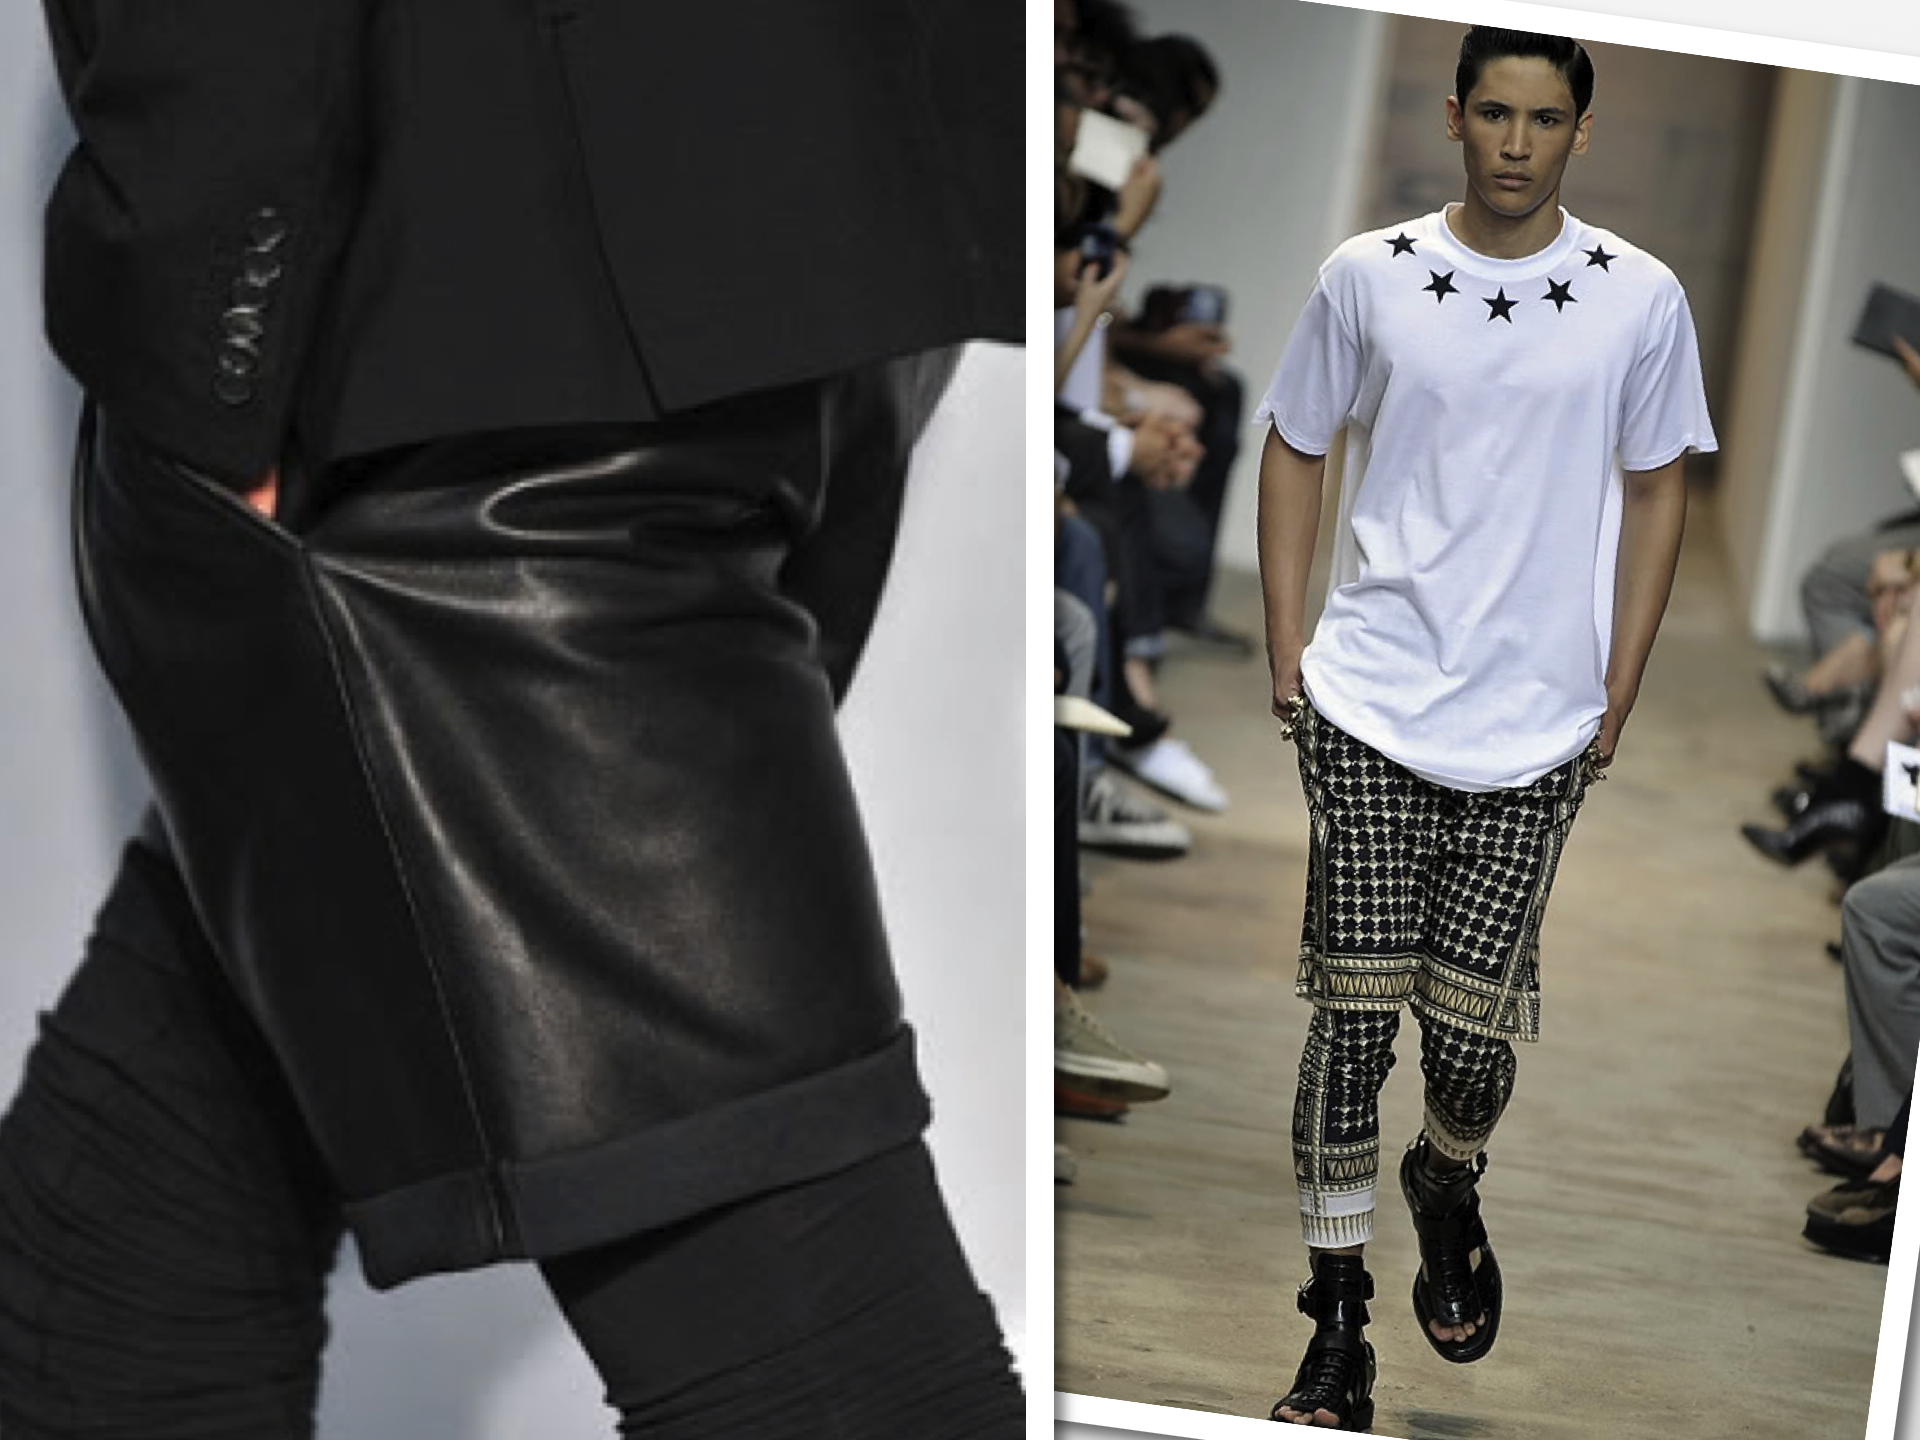 Tights, Leggings, and 'Meggings …Men's Fashion?”